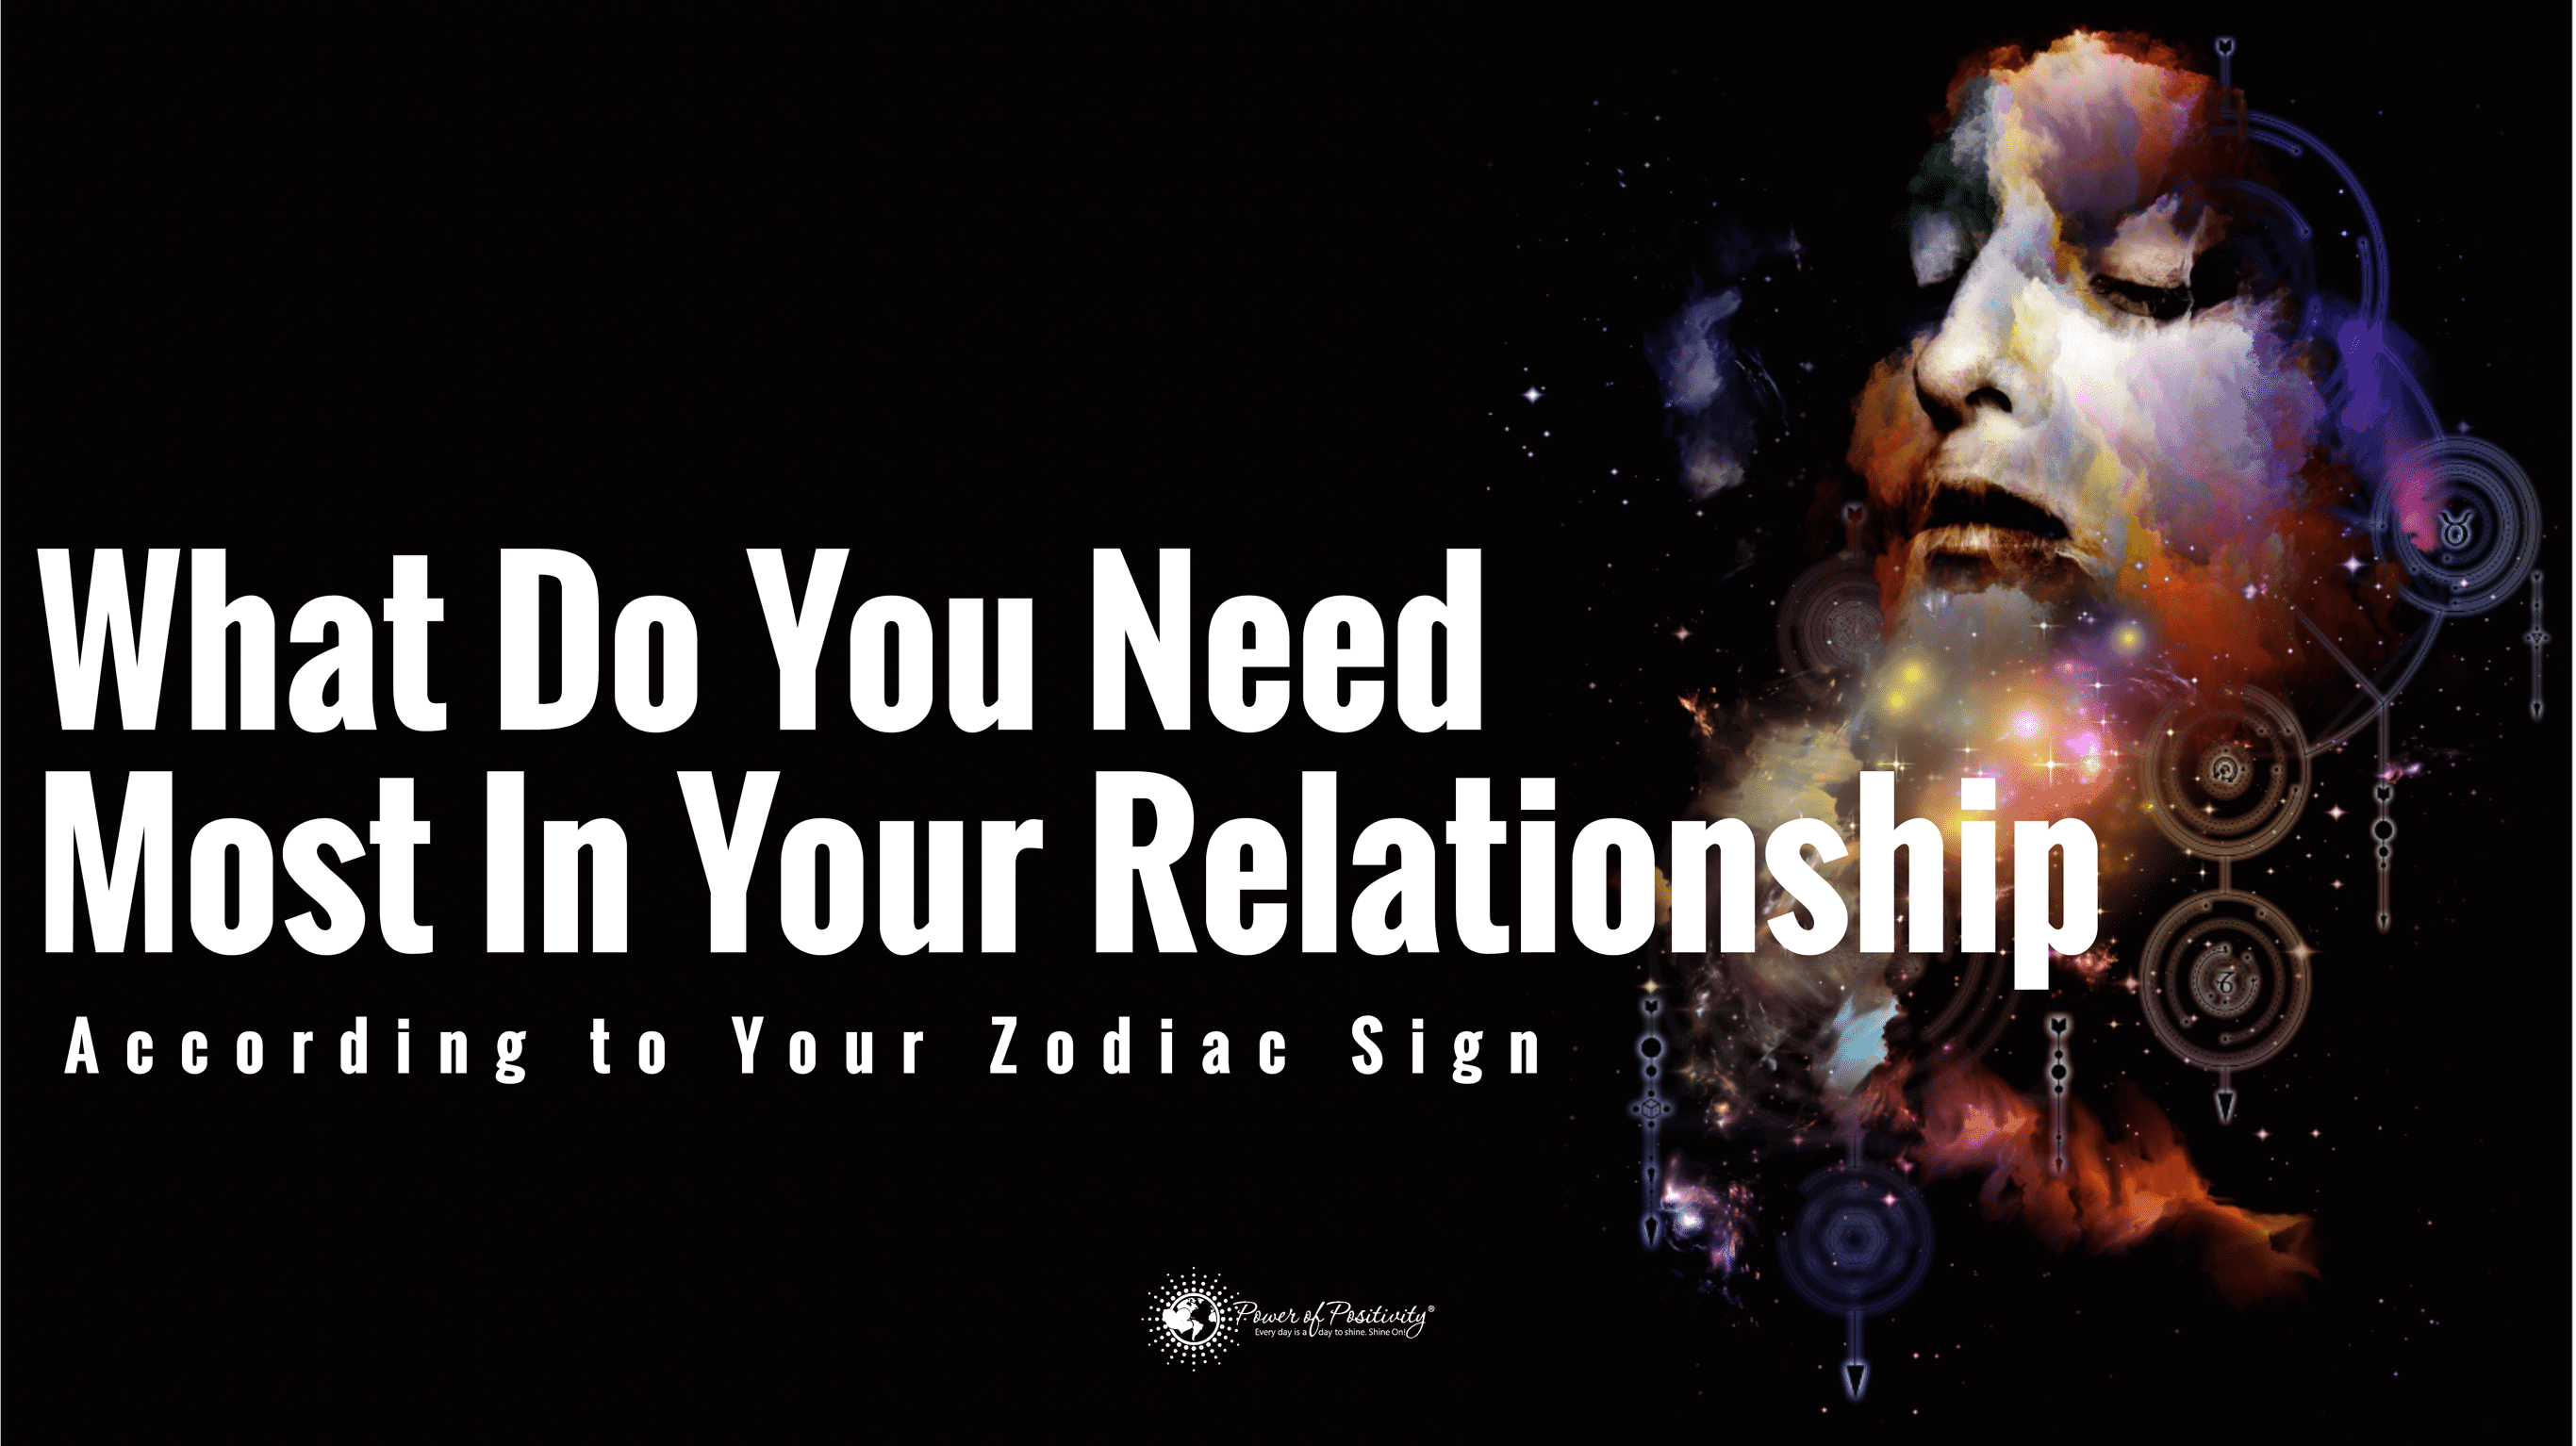 What Do You Need Most In Your Relationship, According to Your Zodiac Sign?